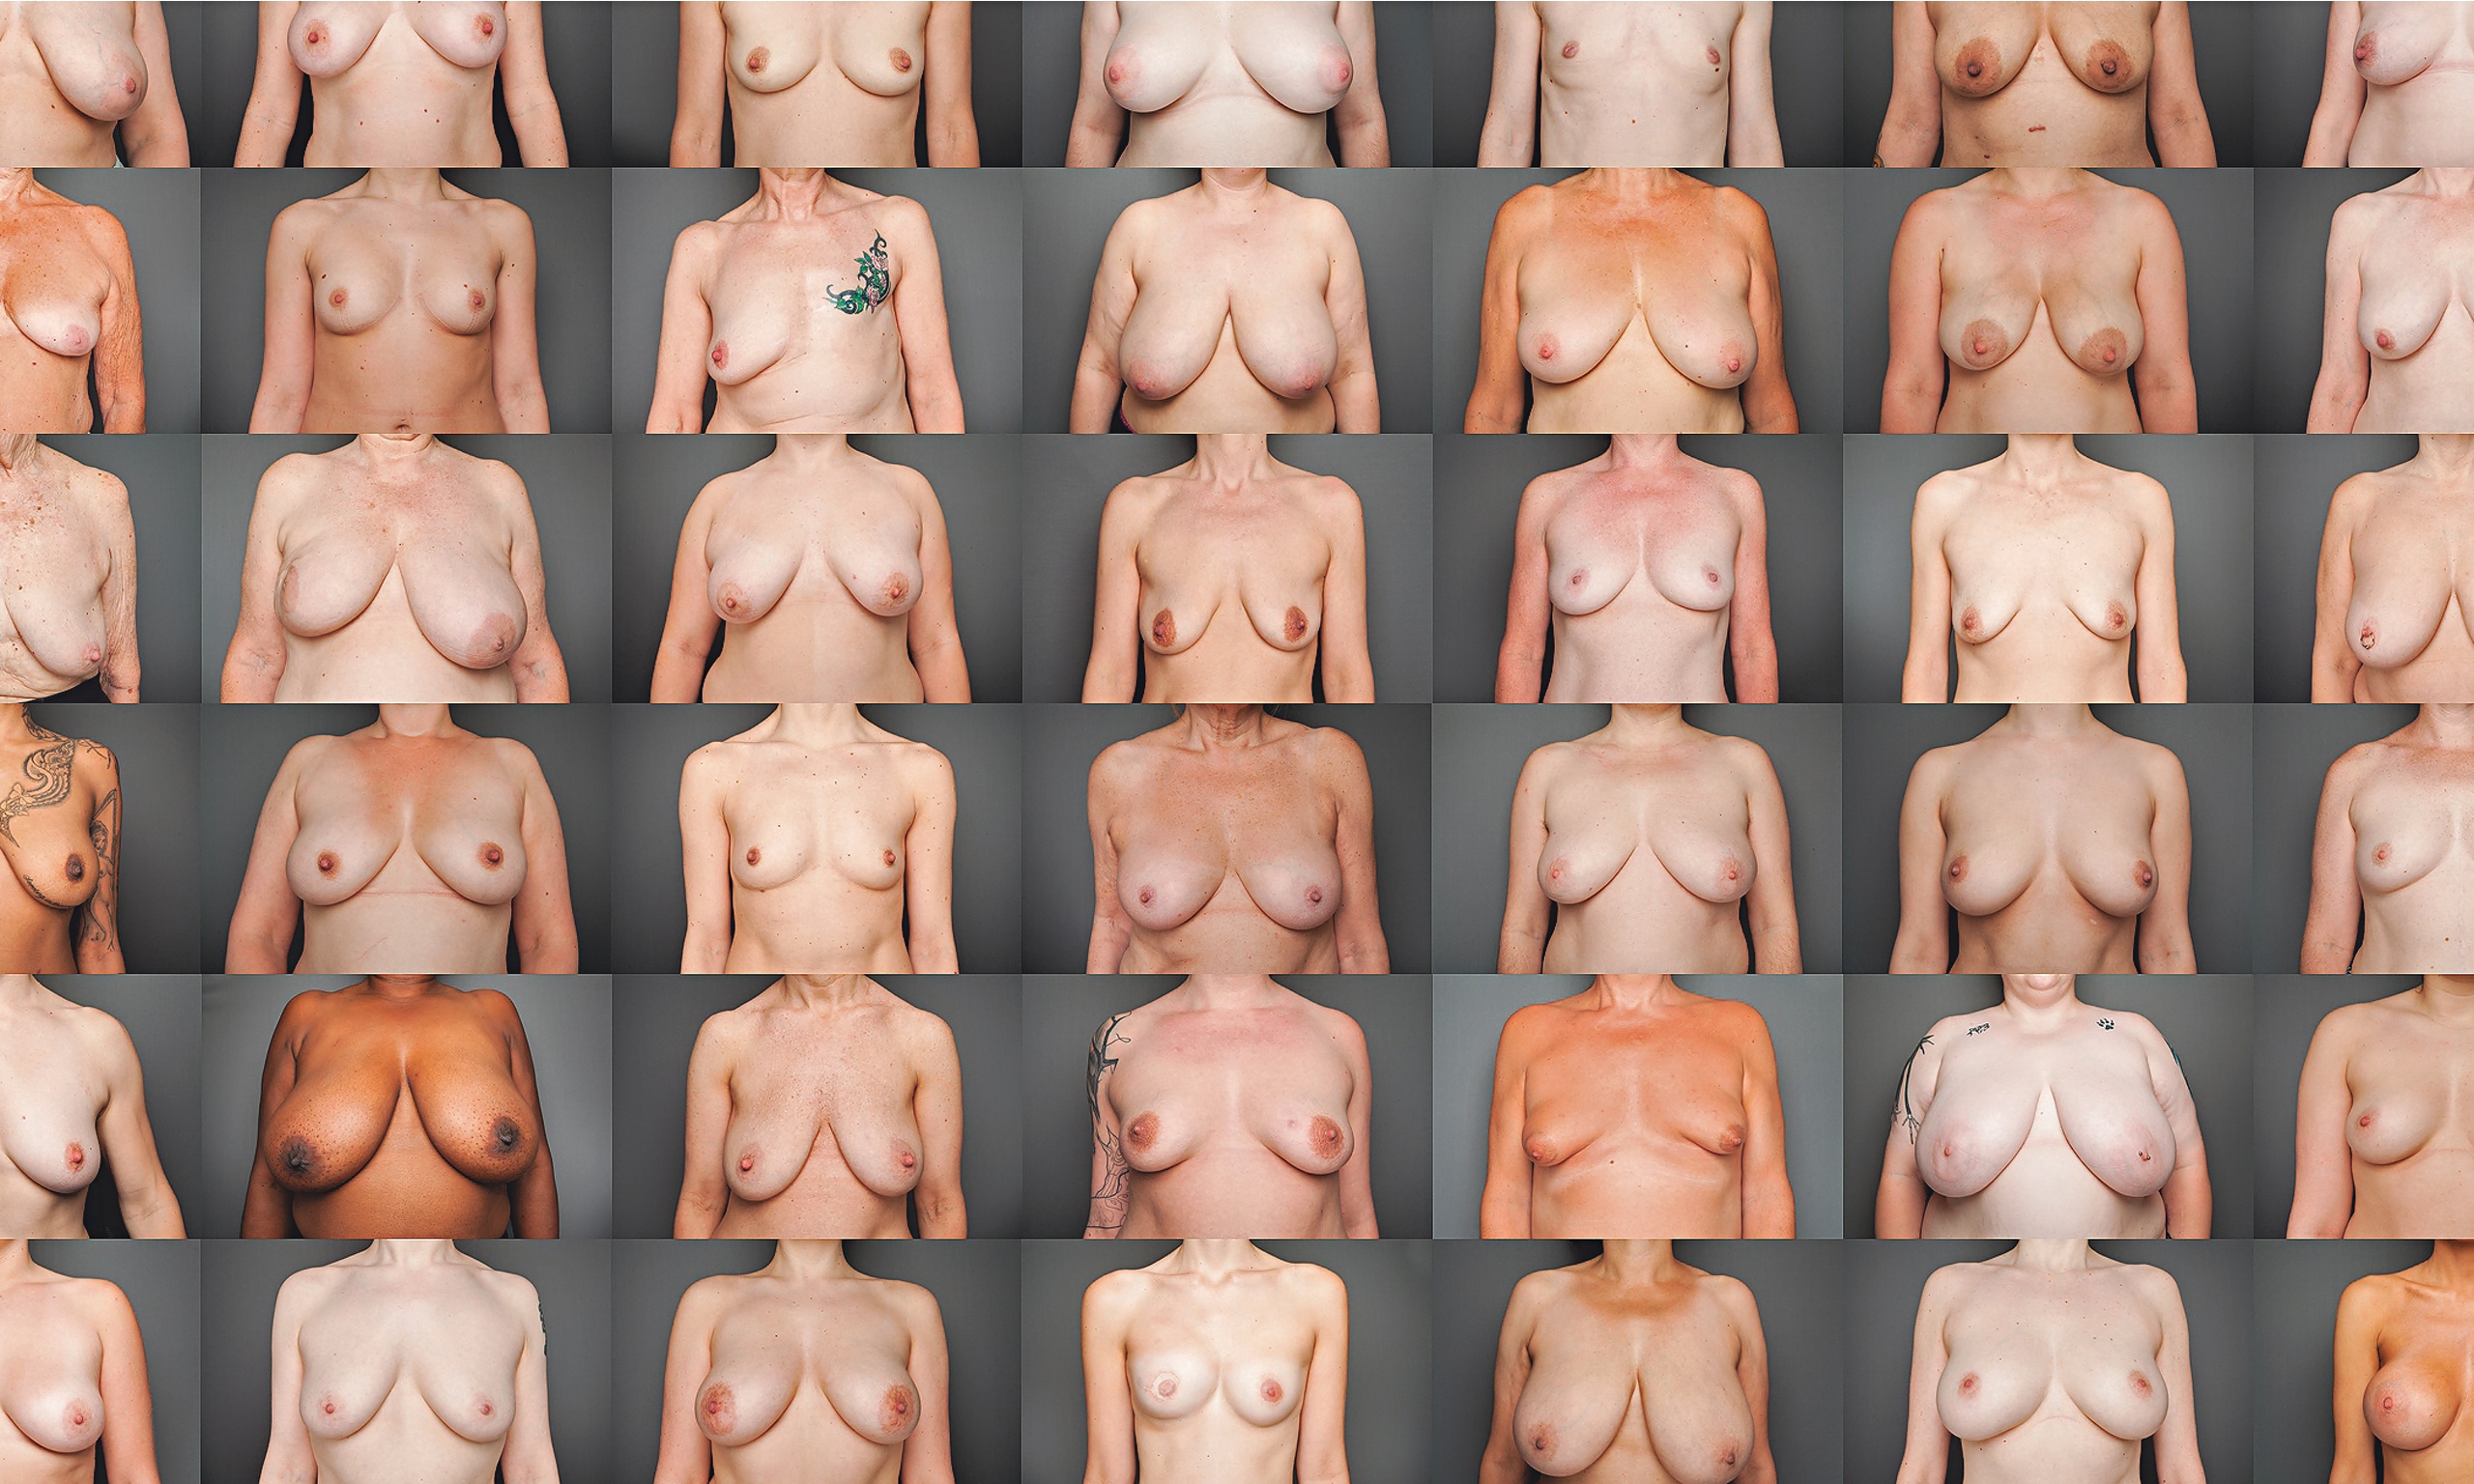 100 sets of boobs nude